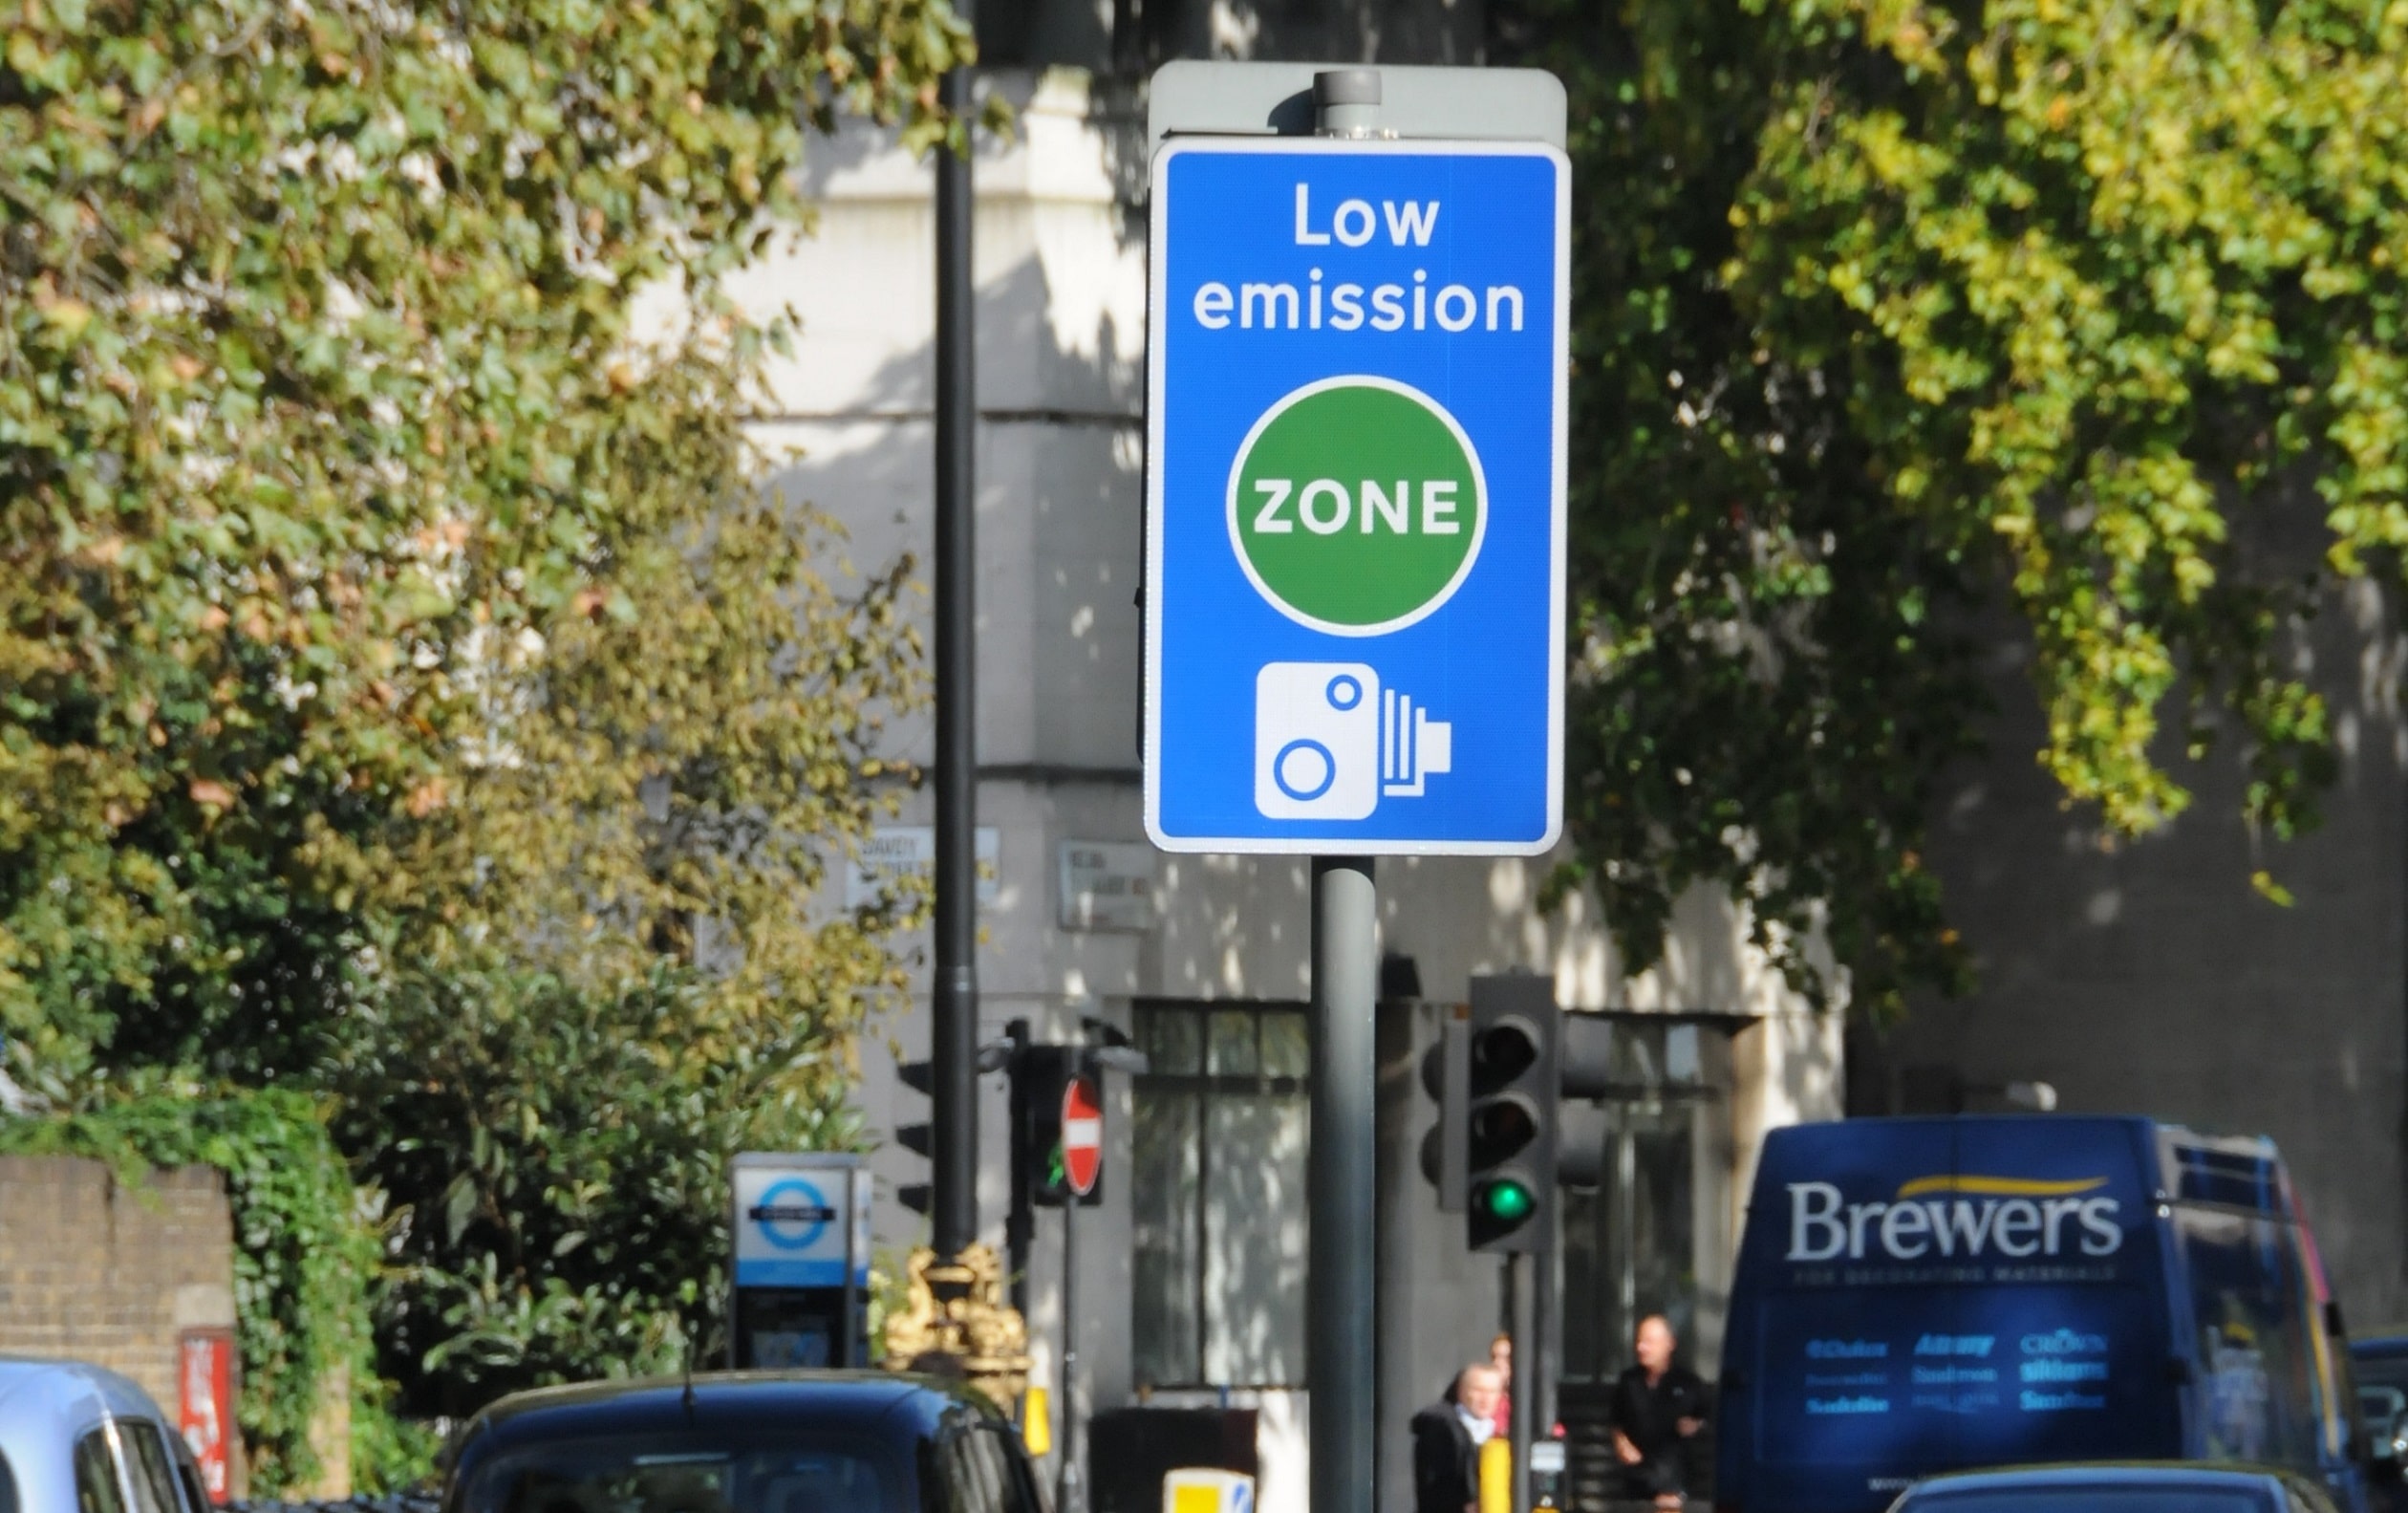 Policies around the likes of clean-air zones have been under scrutiny in election year